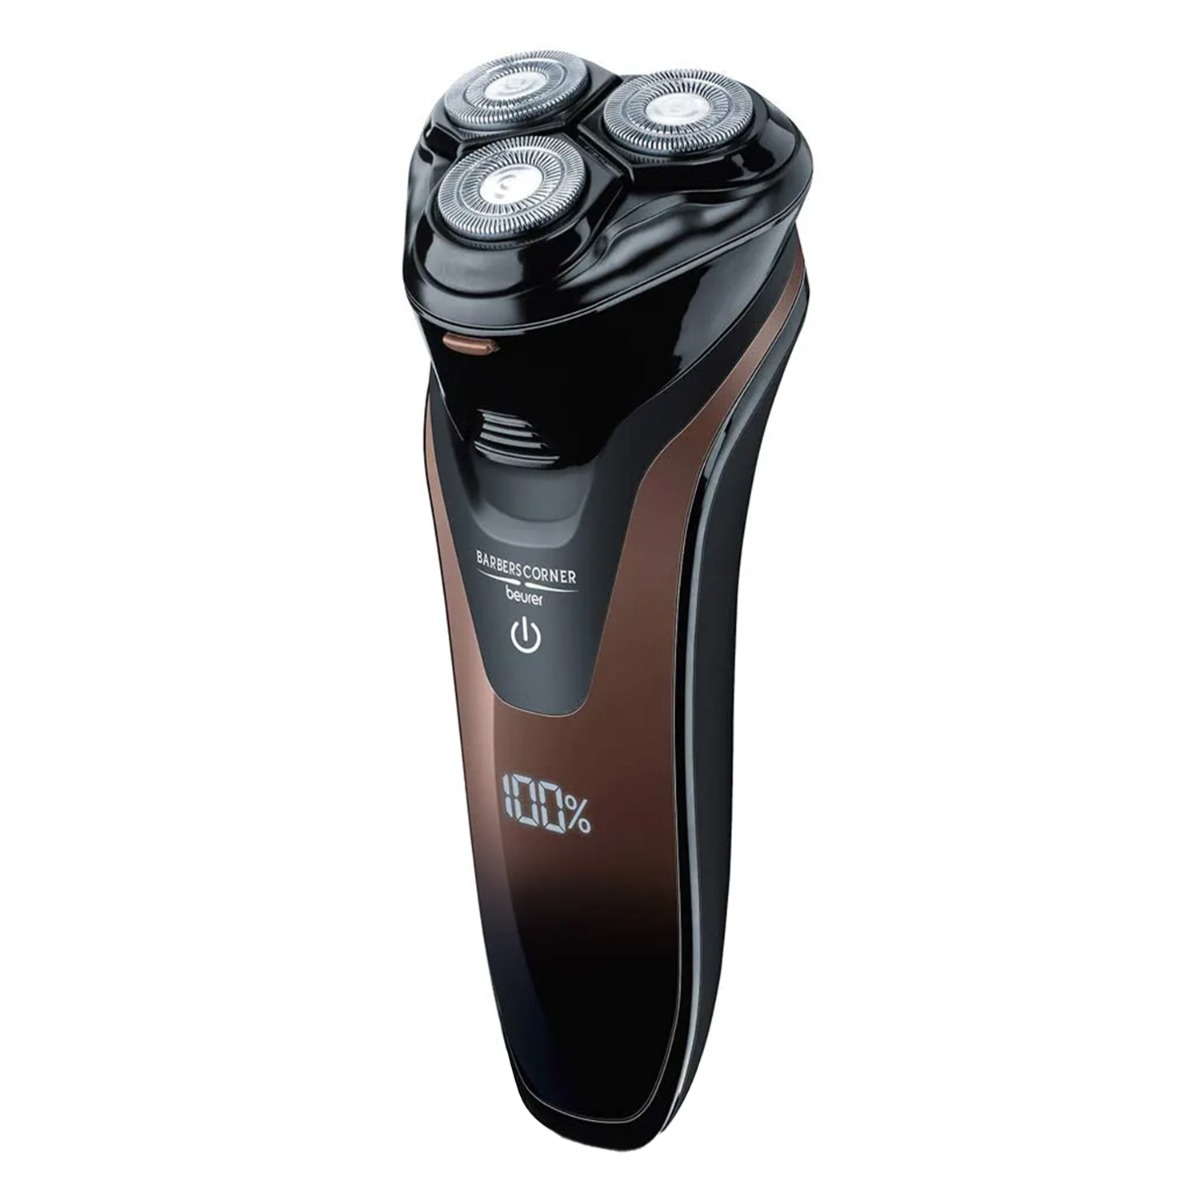 Beurer HR 8000 Rotary Shaver Precision Cutting System With 3 Spring-Loaded Dual-Ring Shaver Heads 2-in-1 Beard And Sideburn Styler As Well As Pop-up Contour Trimmer, 1Pc